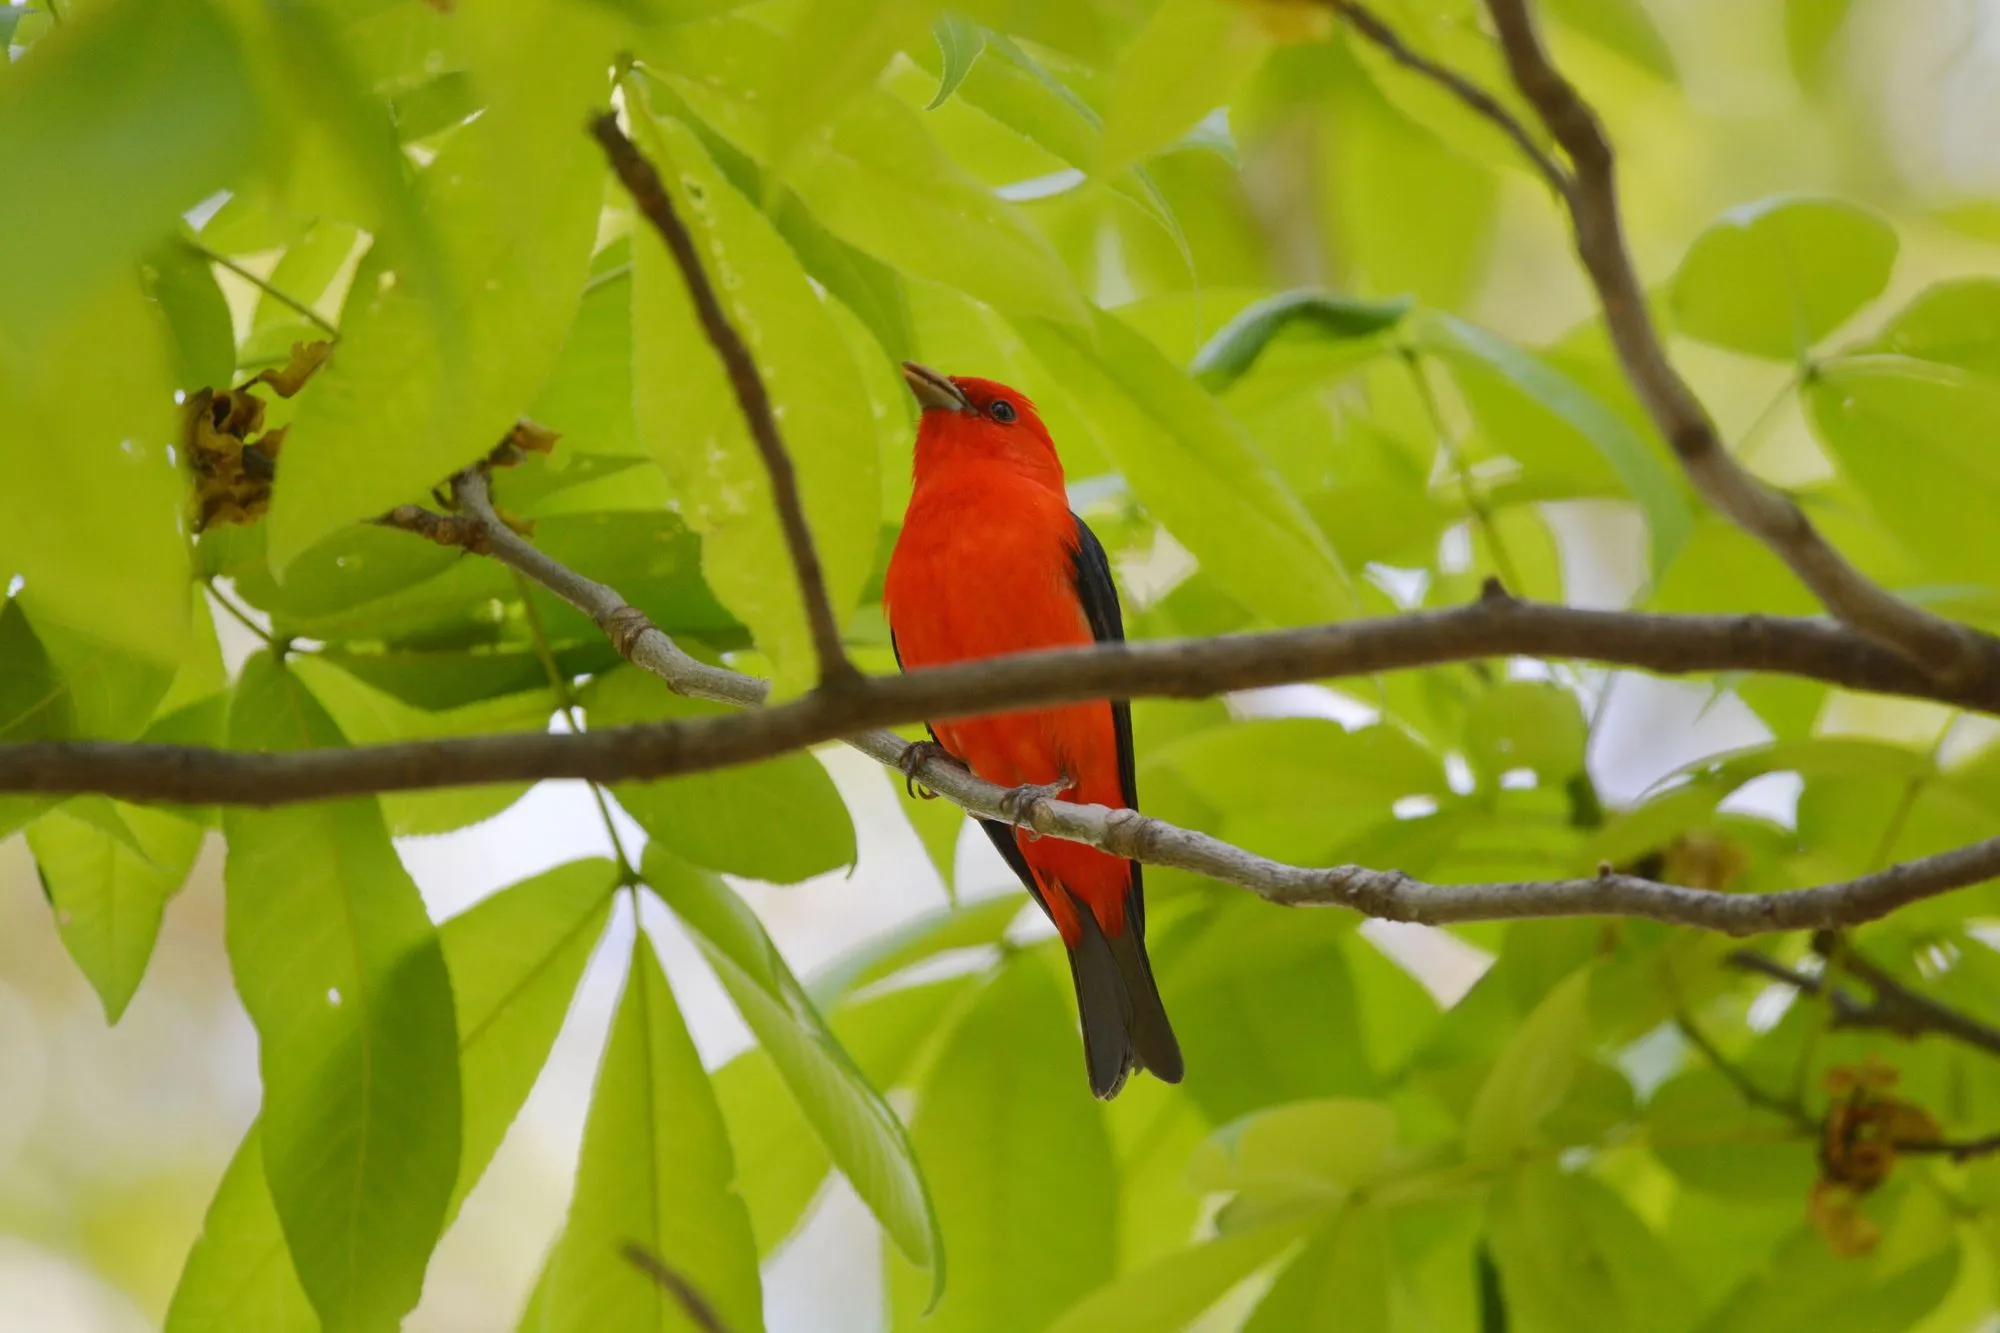 Discover interesting scarlet tanager facts.